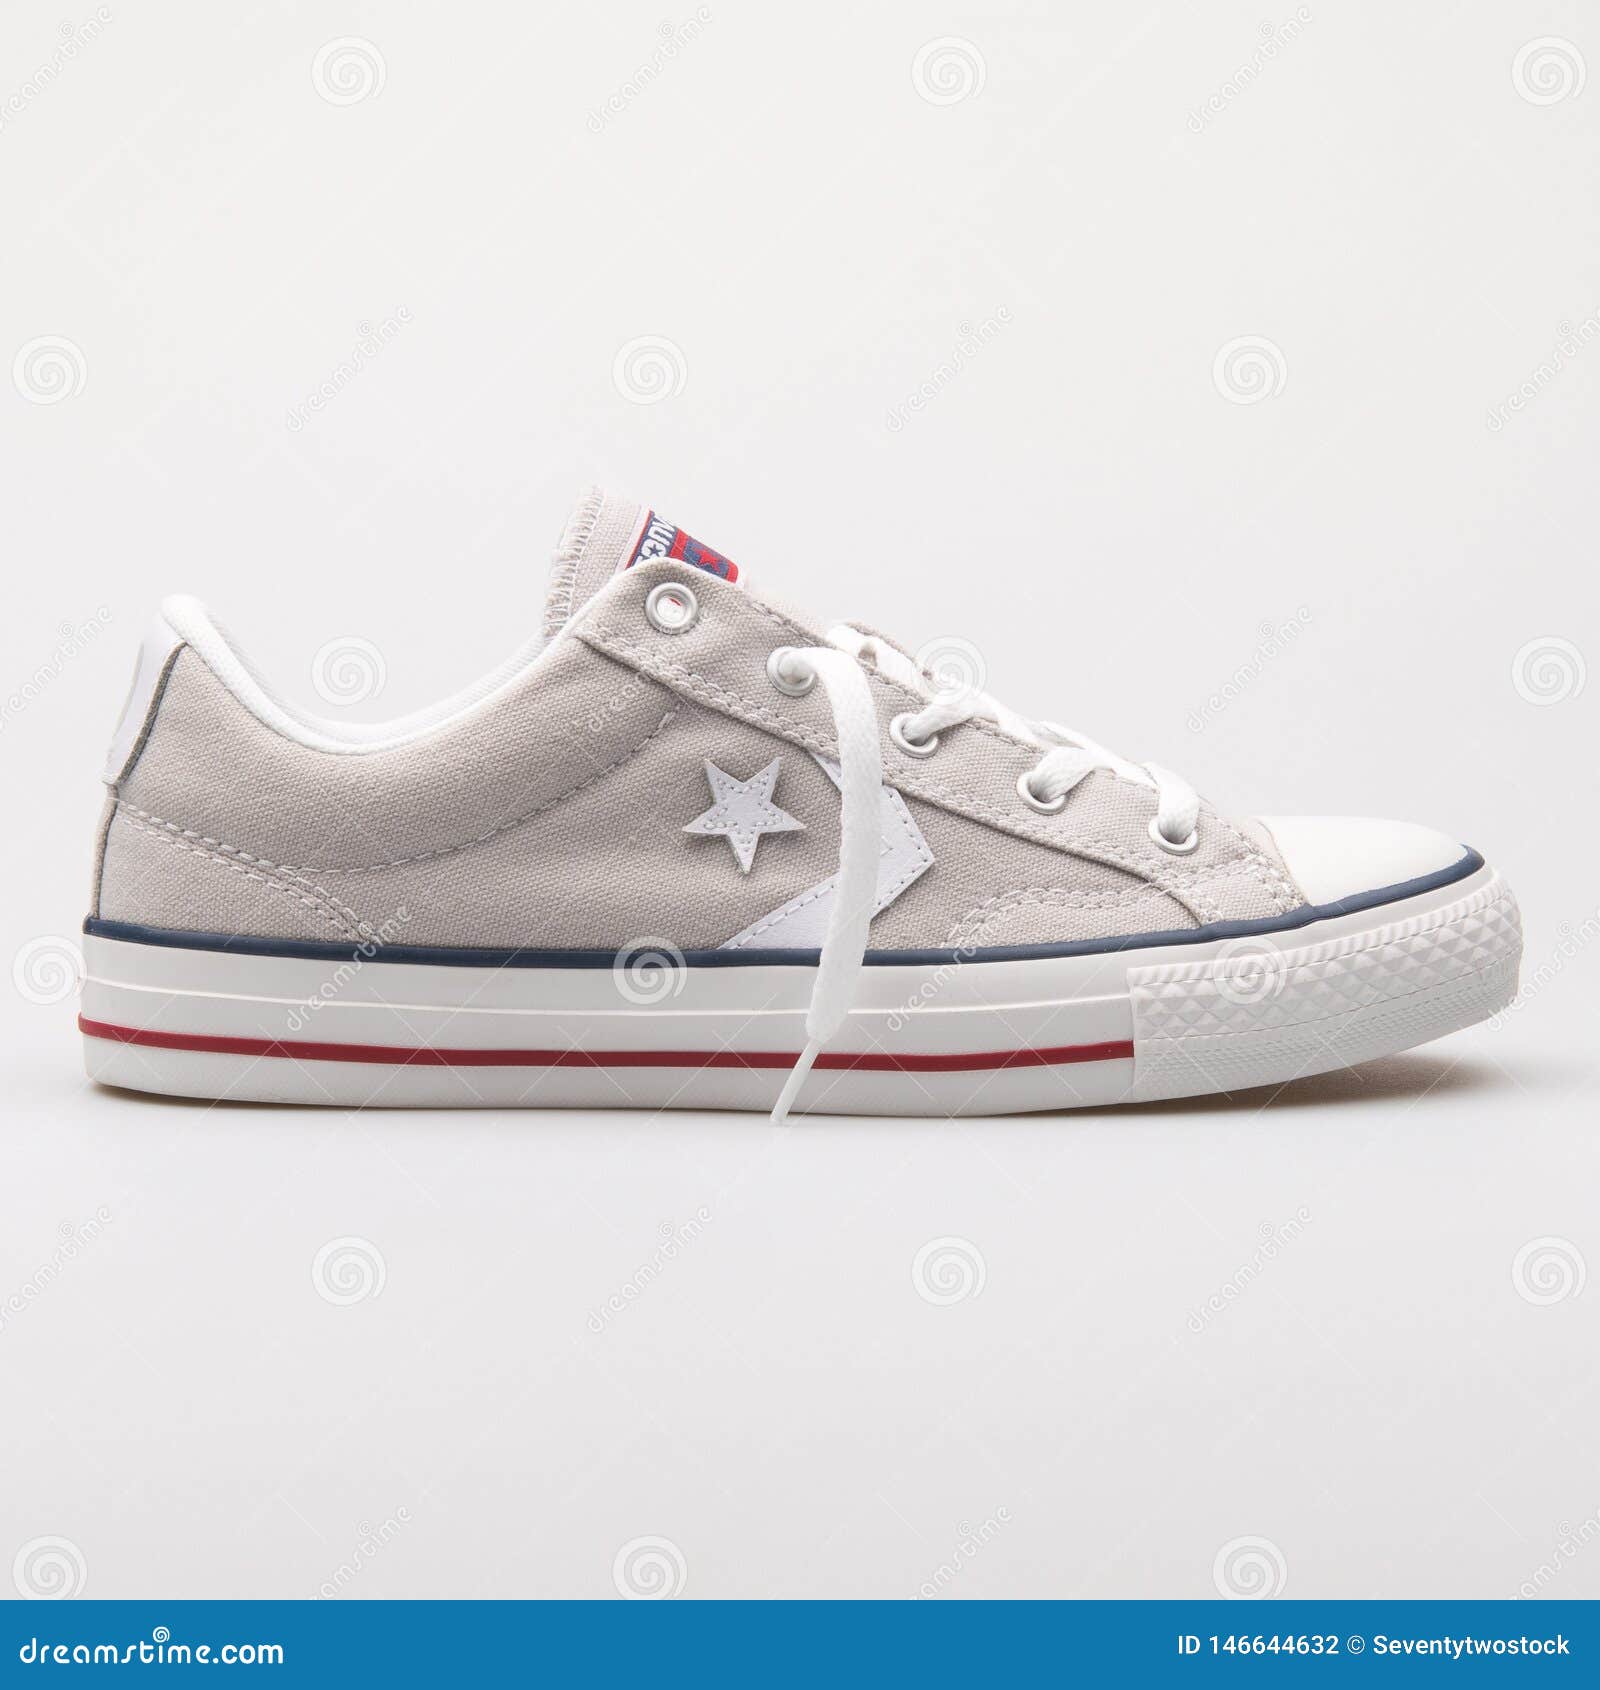 converse all player